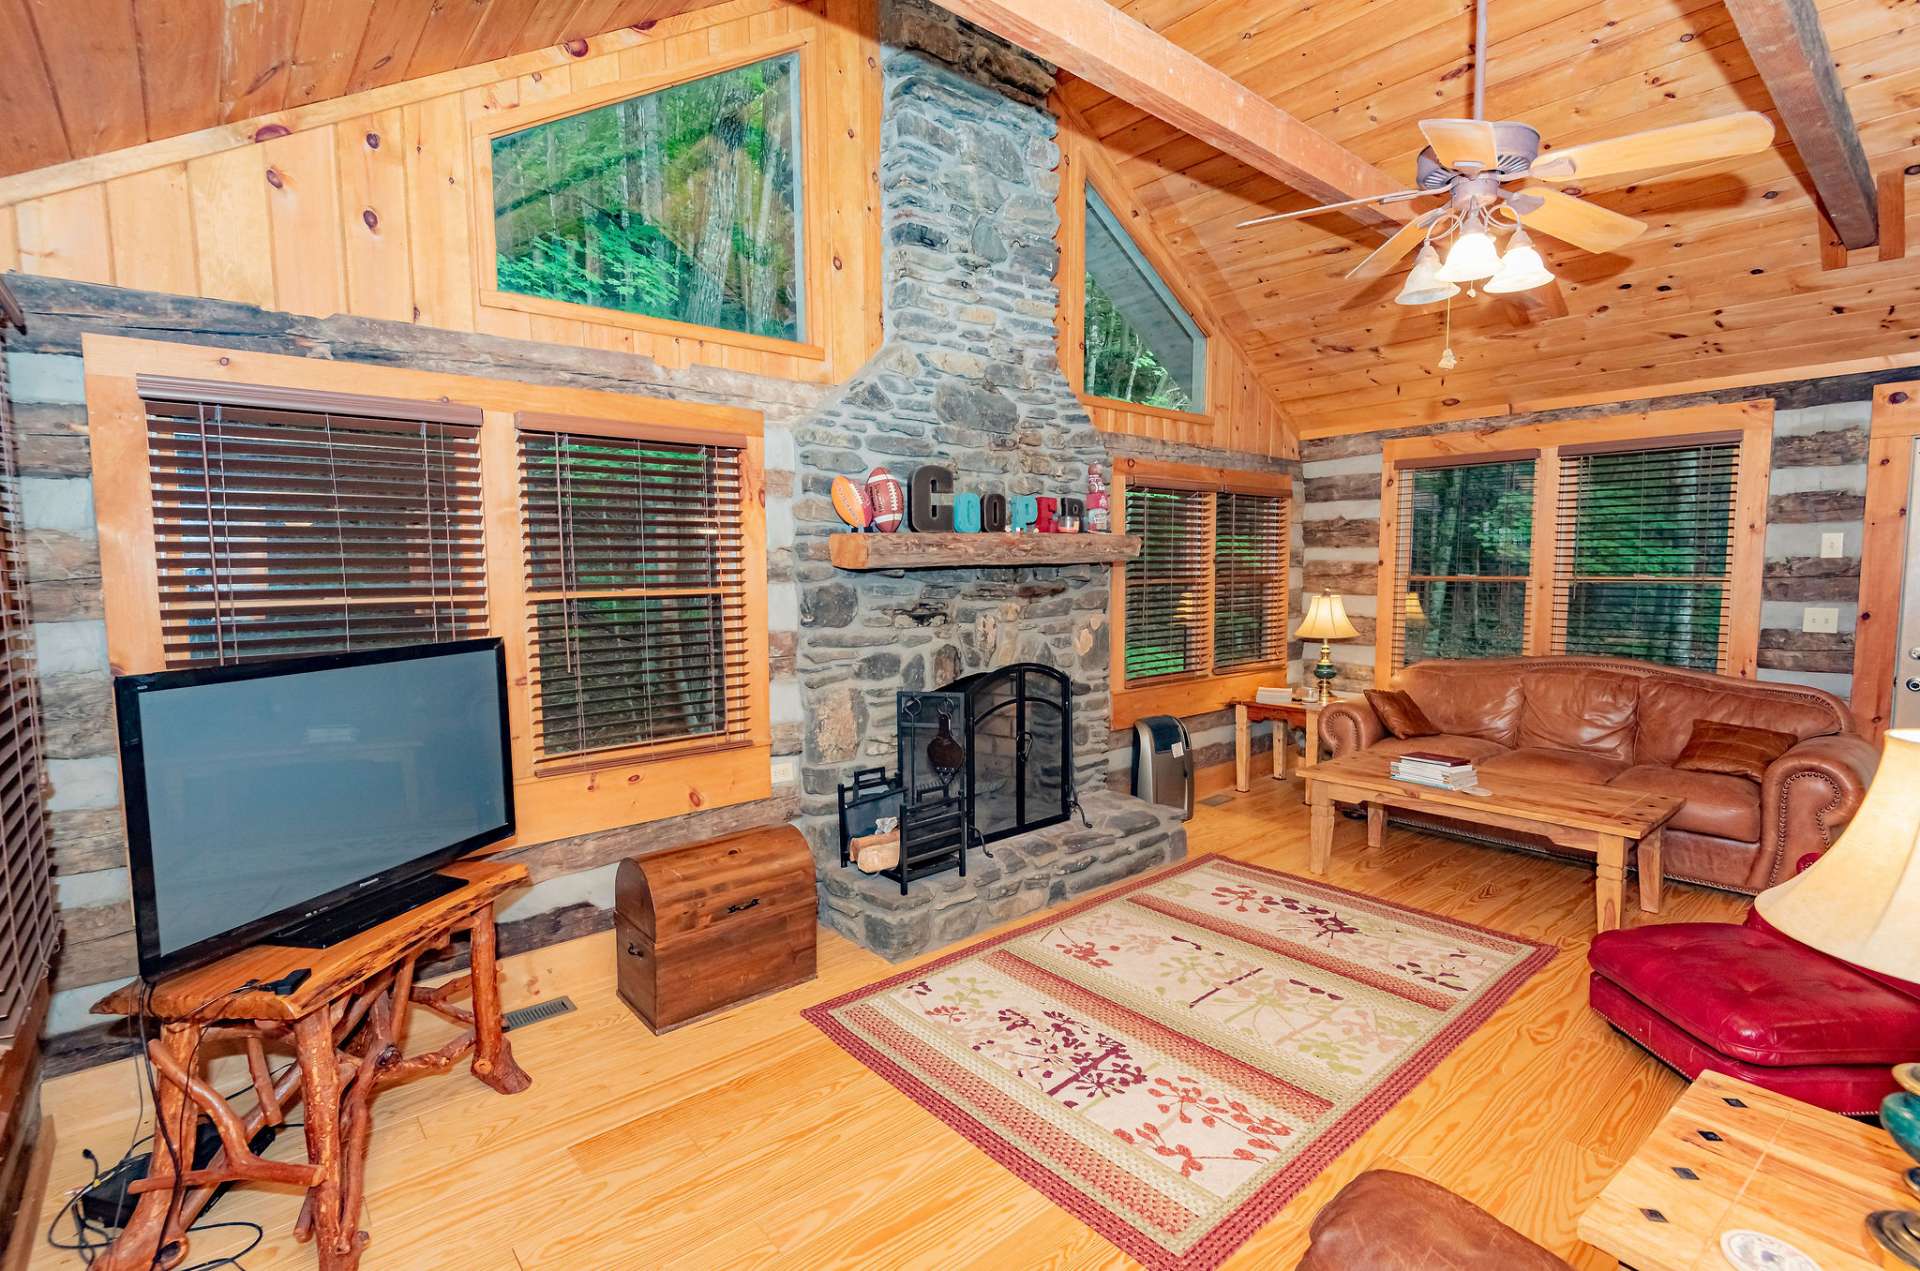 This space offers plenty of windows for natural light, wood floors, and a massive floor to ceiling stone fireplace.